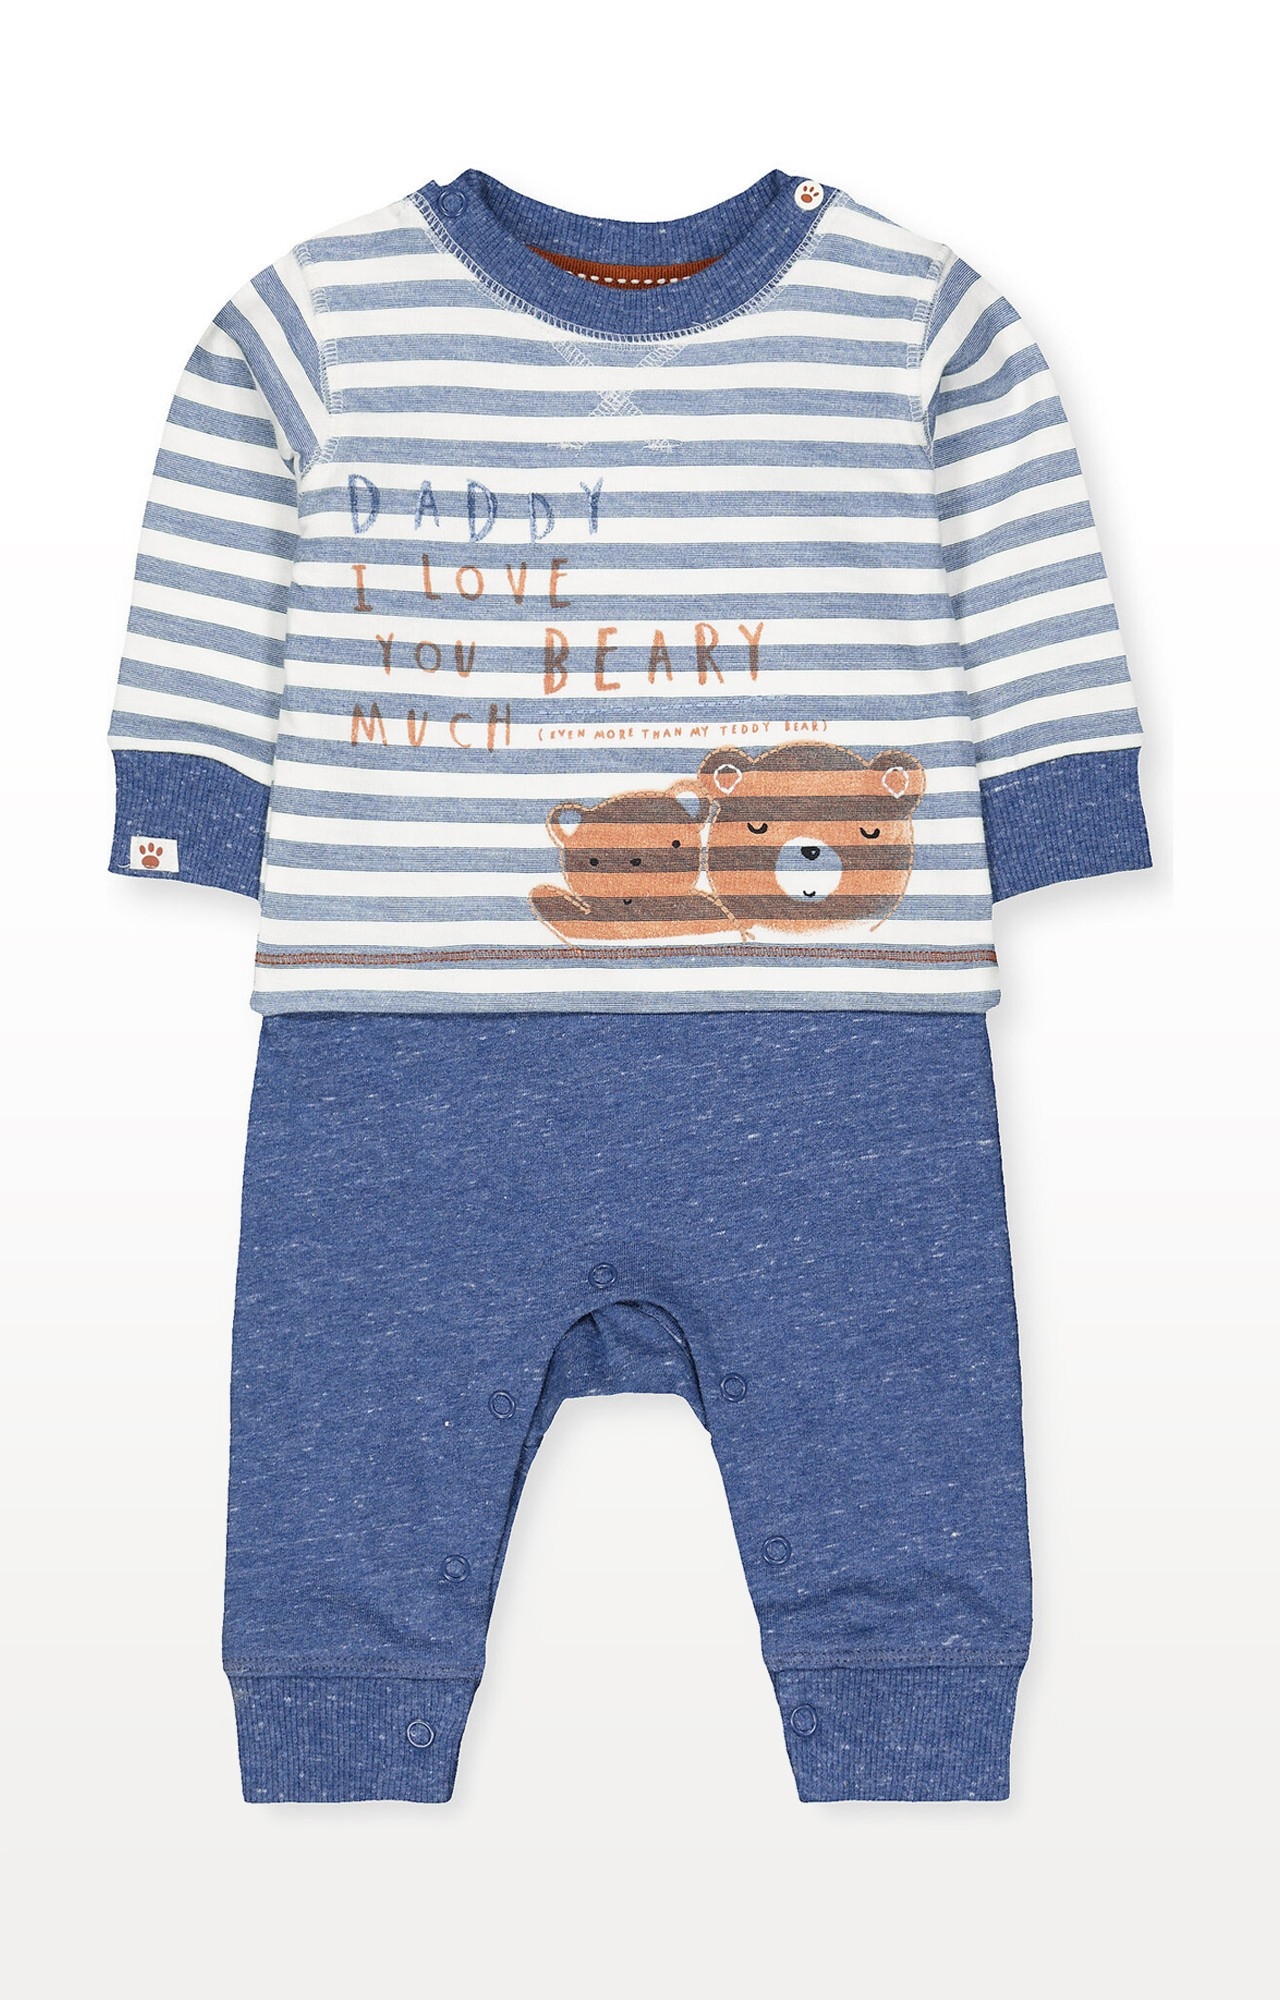 Blue Daddy Bear Mock Top All In One